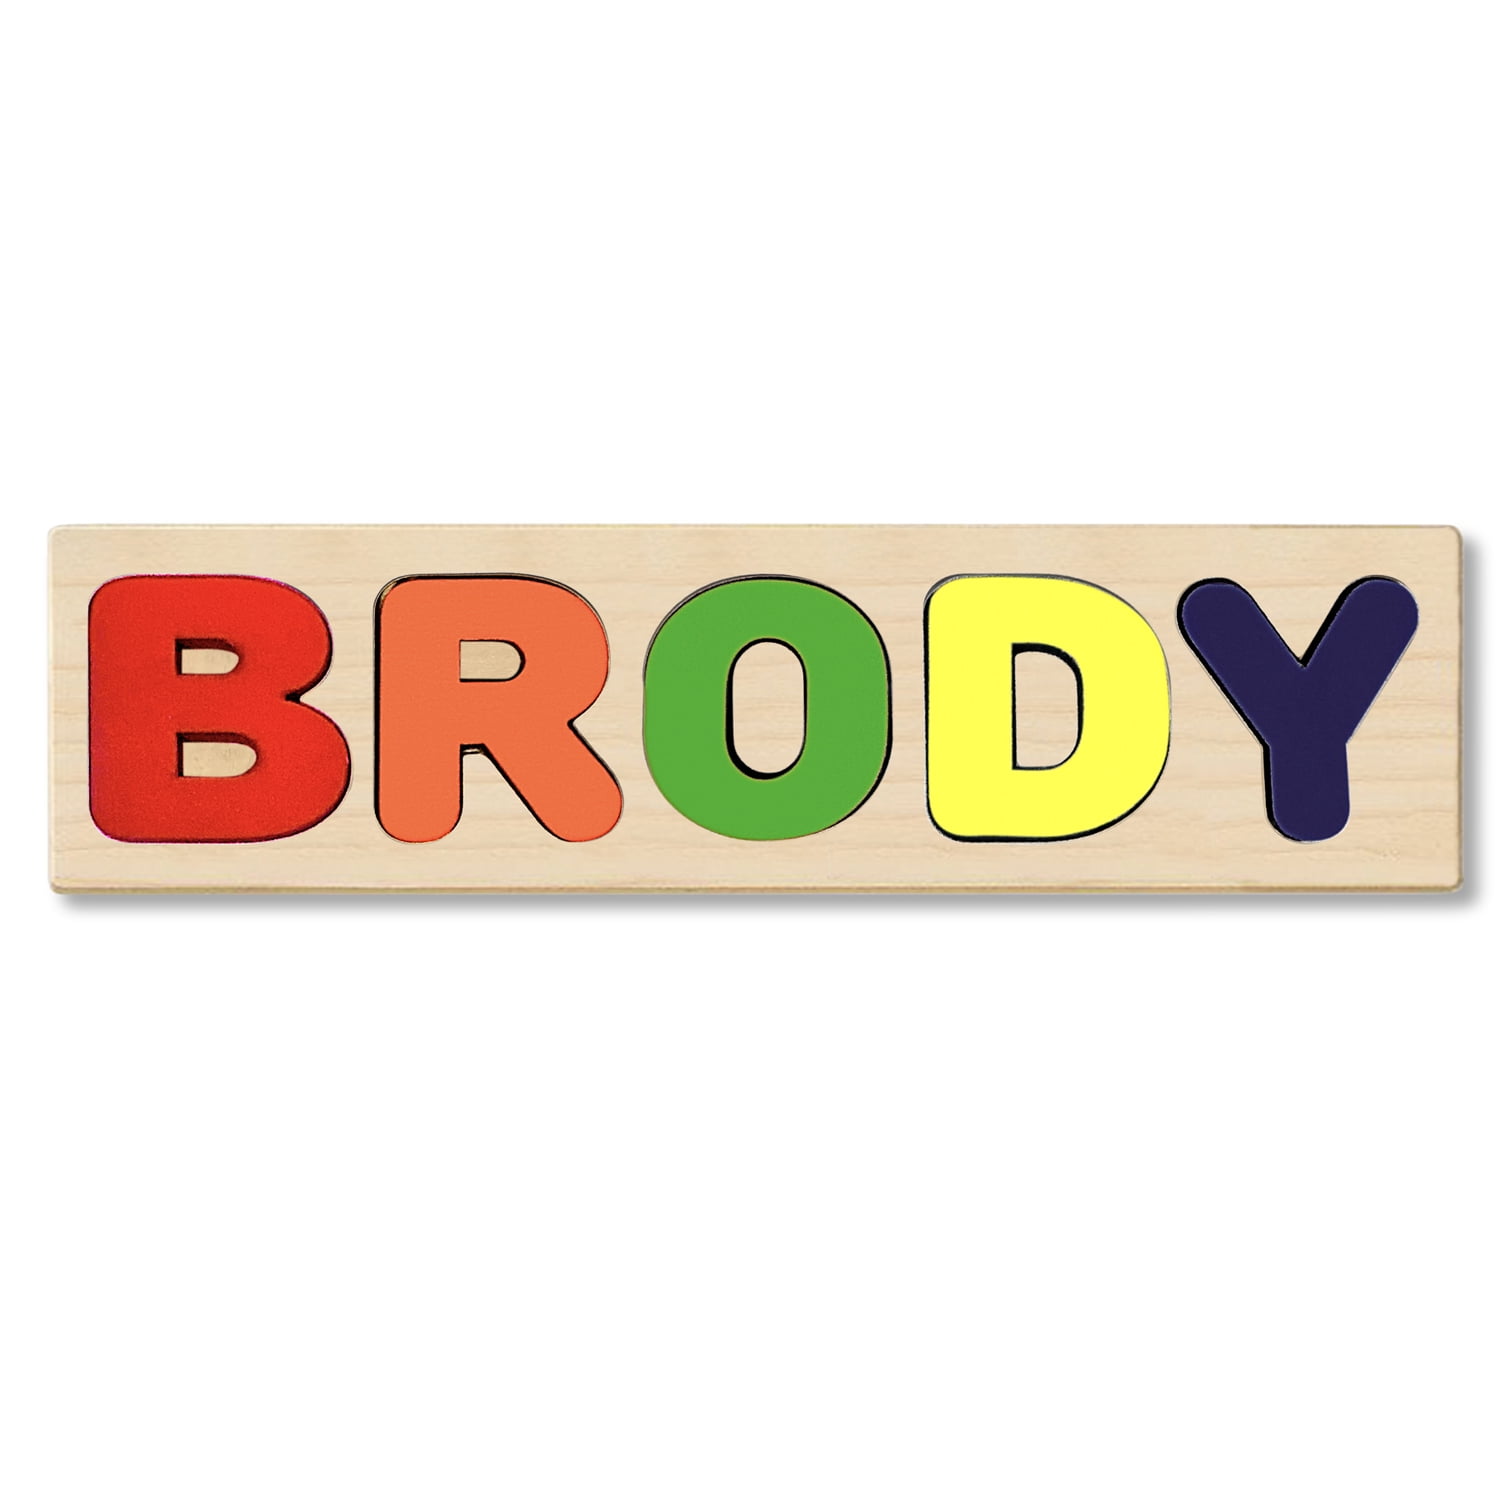 Spell Name and also write your own name Details about   Personalised Name Mat Match up Letters 